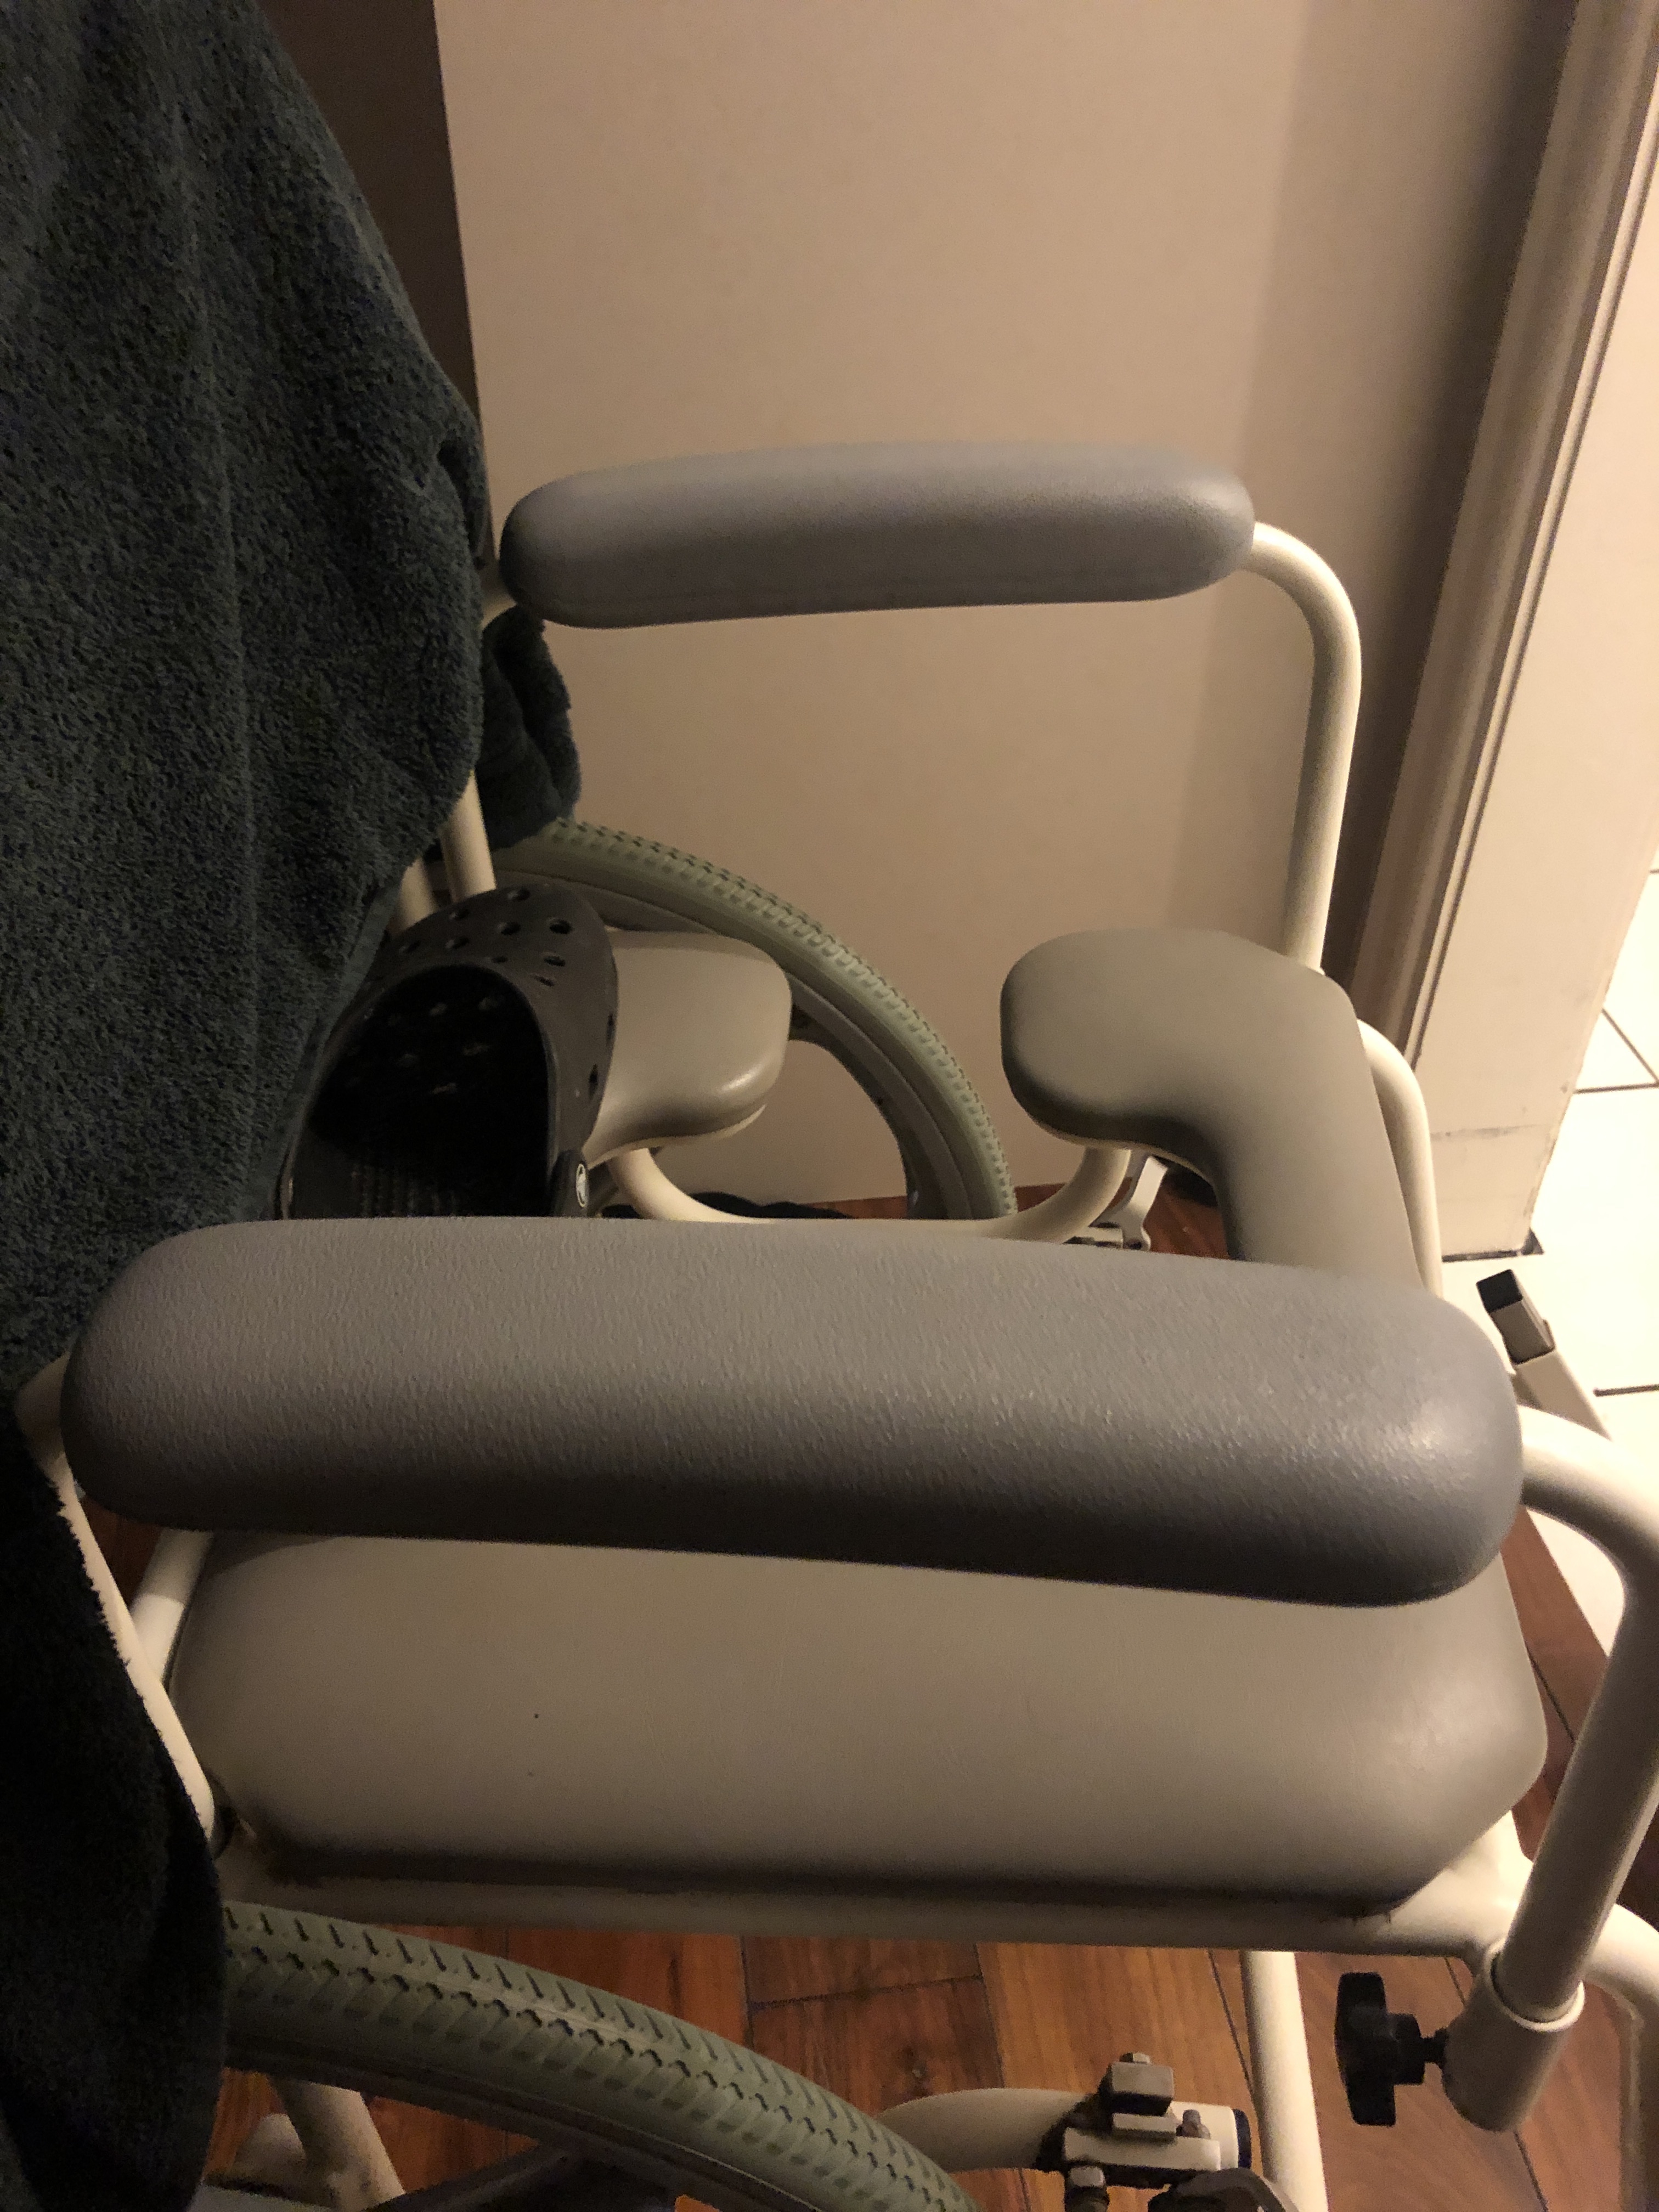 Side access for shower chair